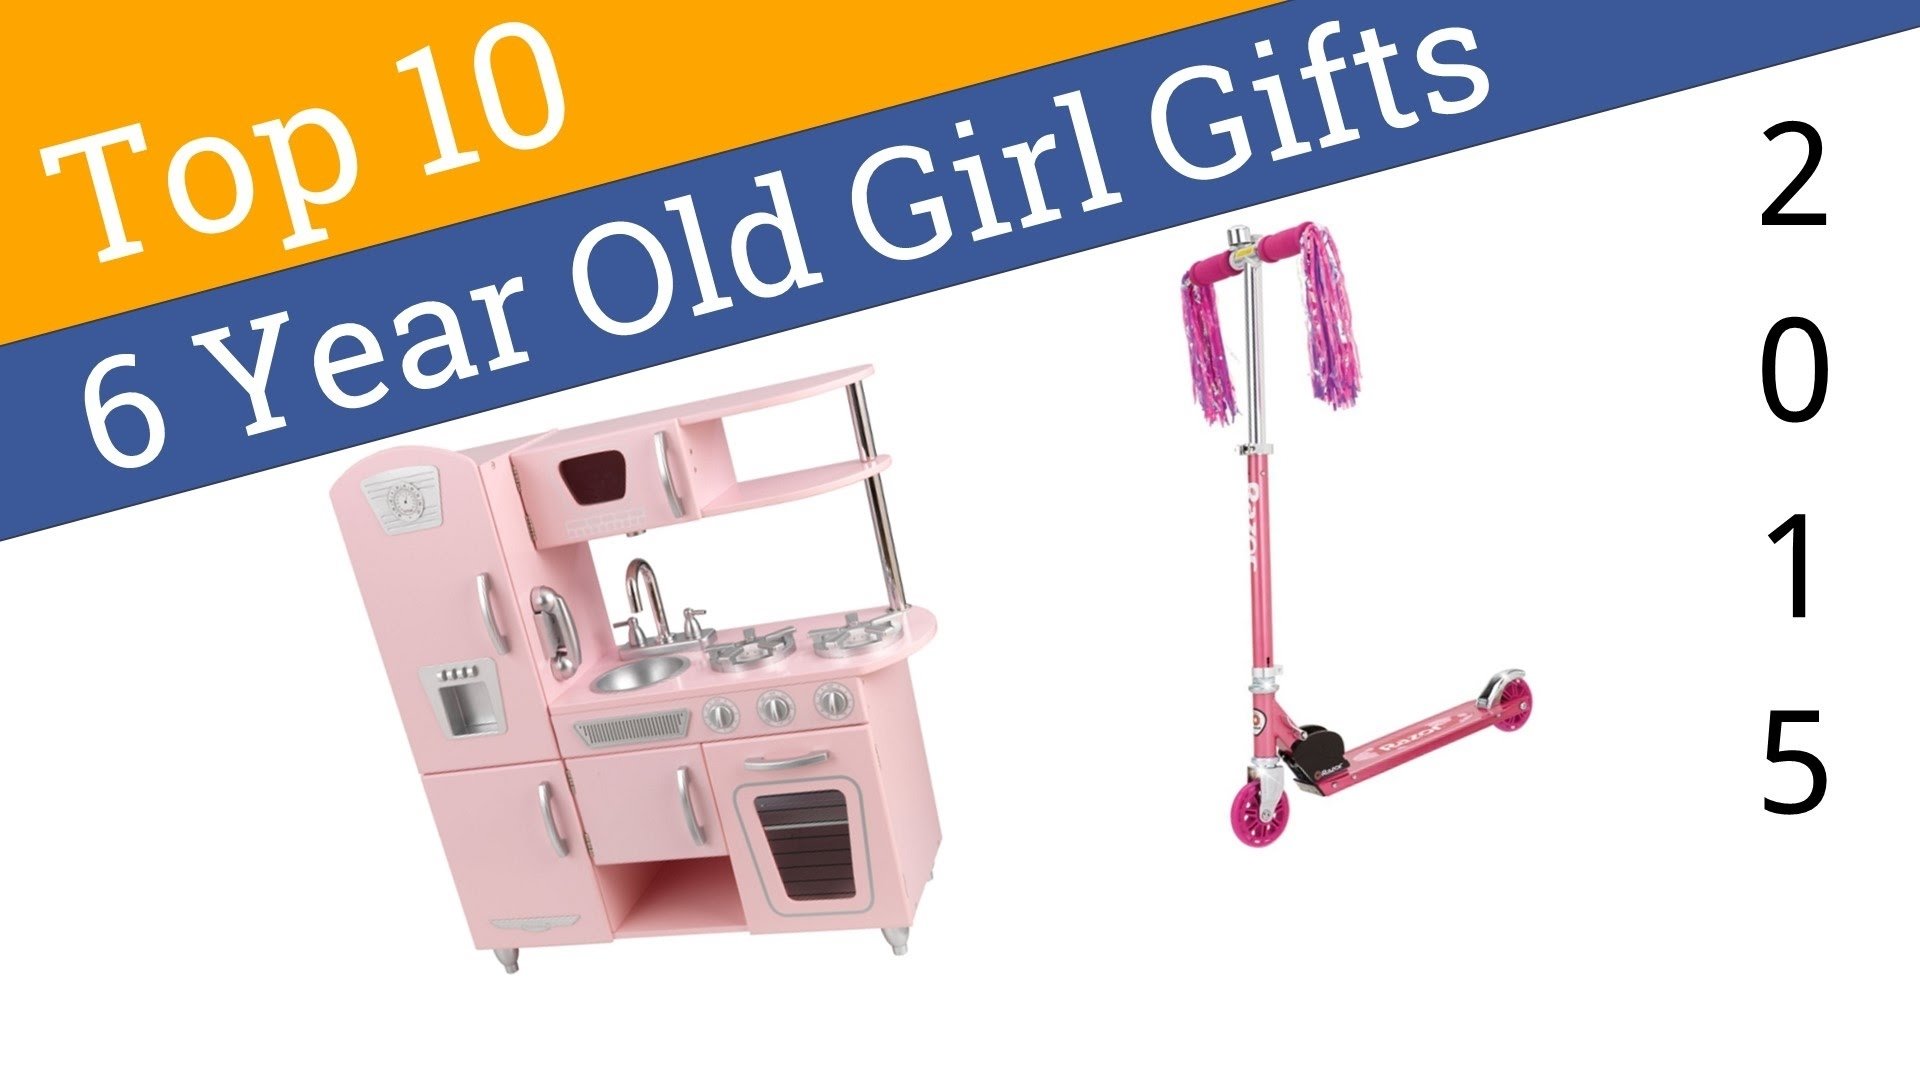 10 Spectacular 6 Year Old Girl Gift Ideas 10 best 6 year old girl gifts 2015 youtube 2022